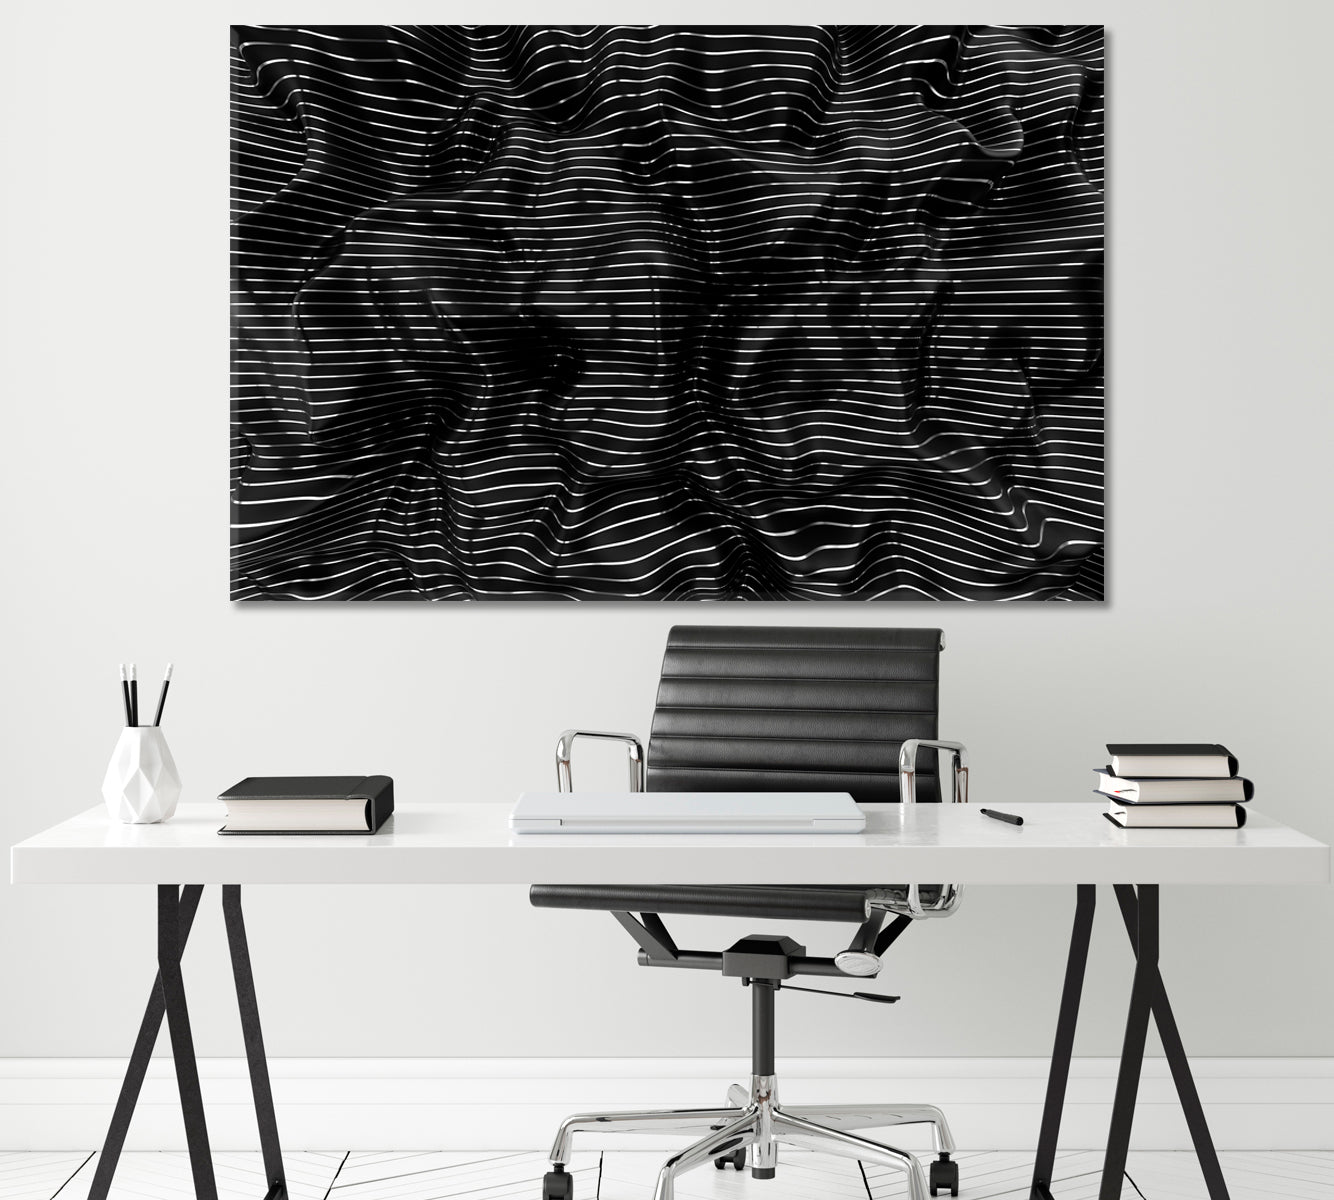 Abstract  Black Wavy Pattern Canvas Print ArtLexy 1 Panel 24"x16" inches 